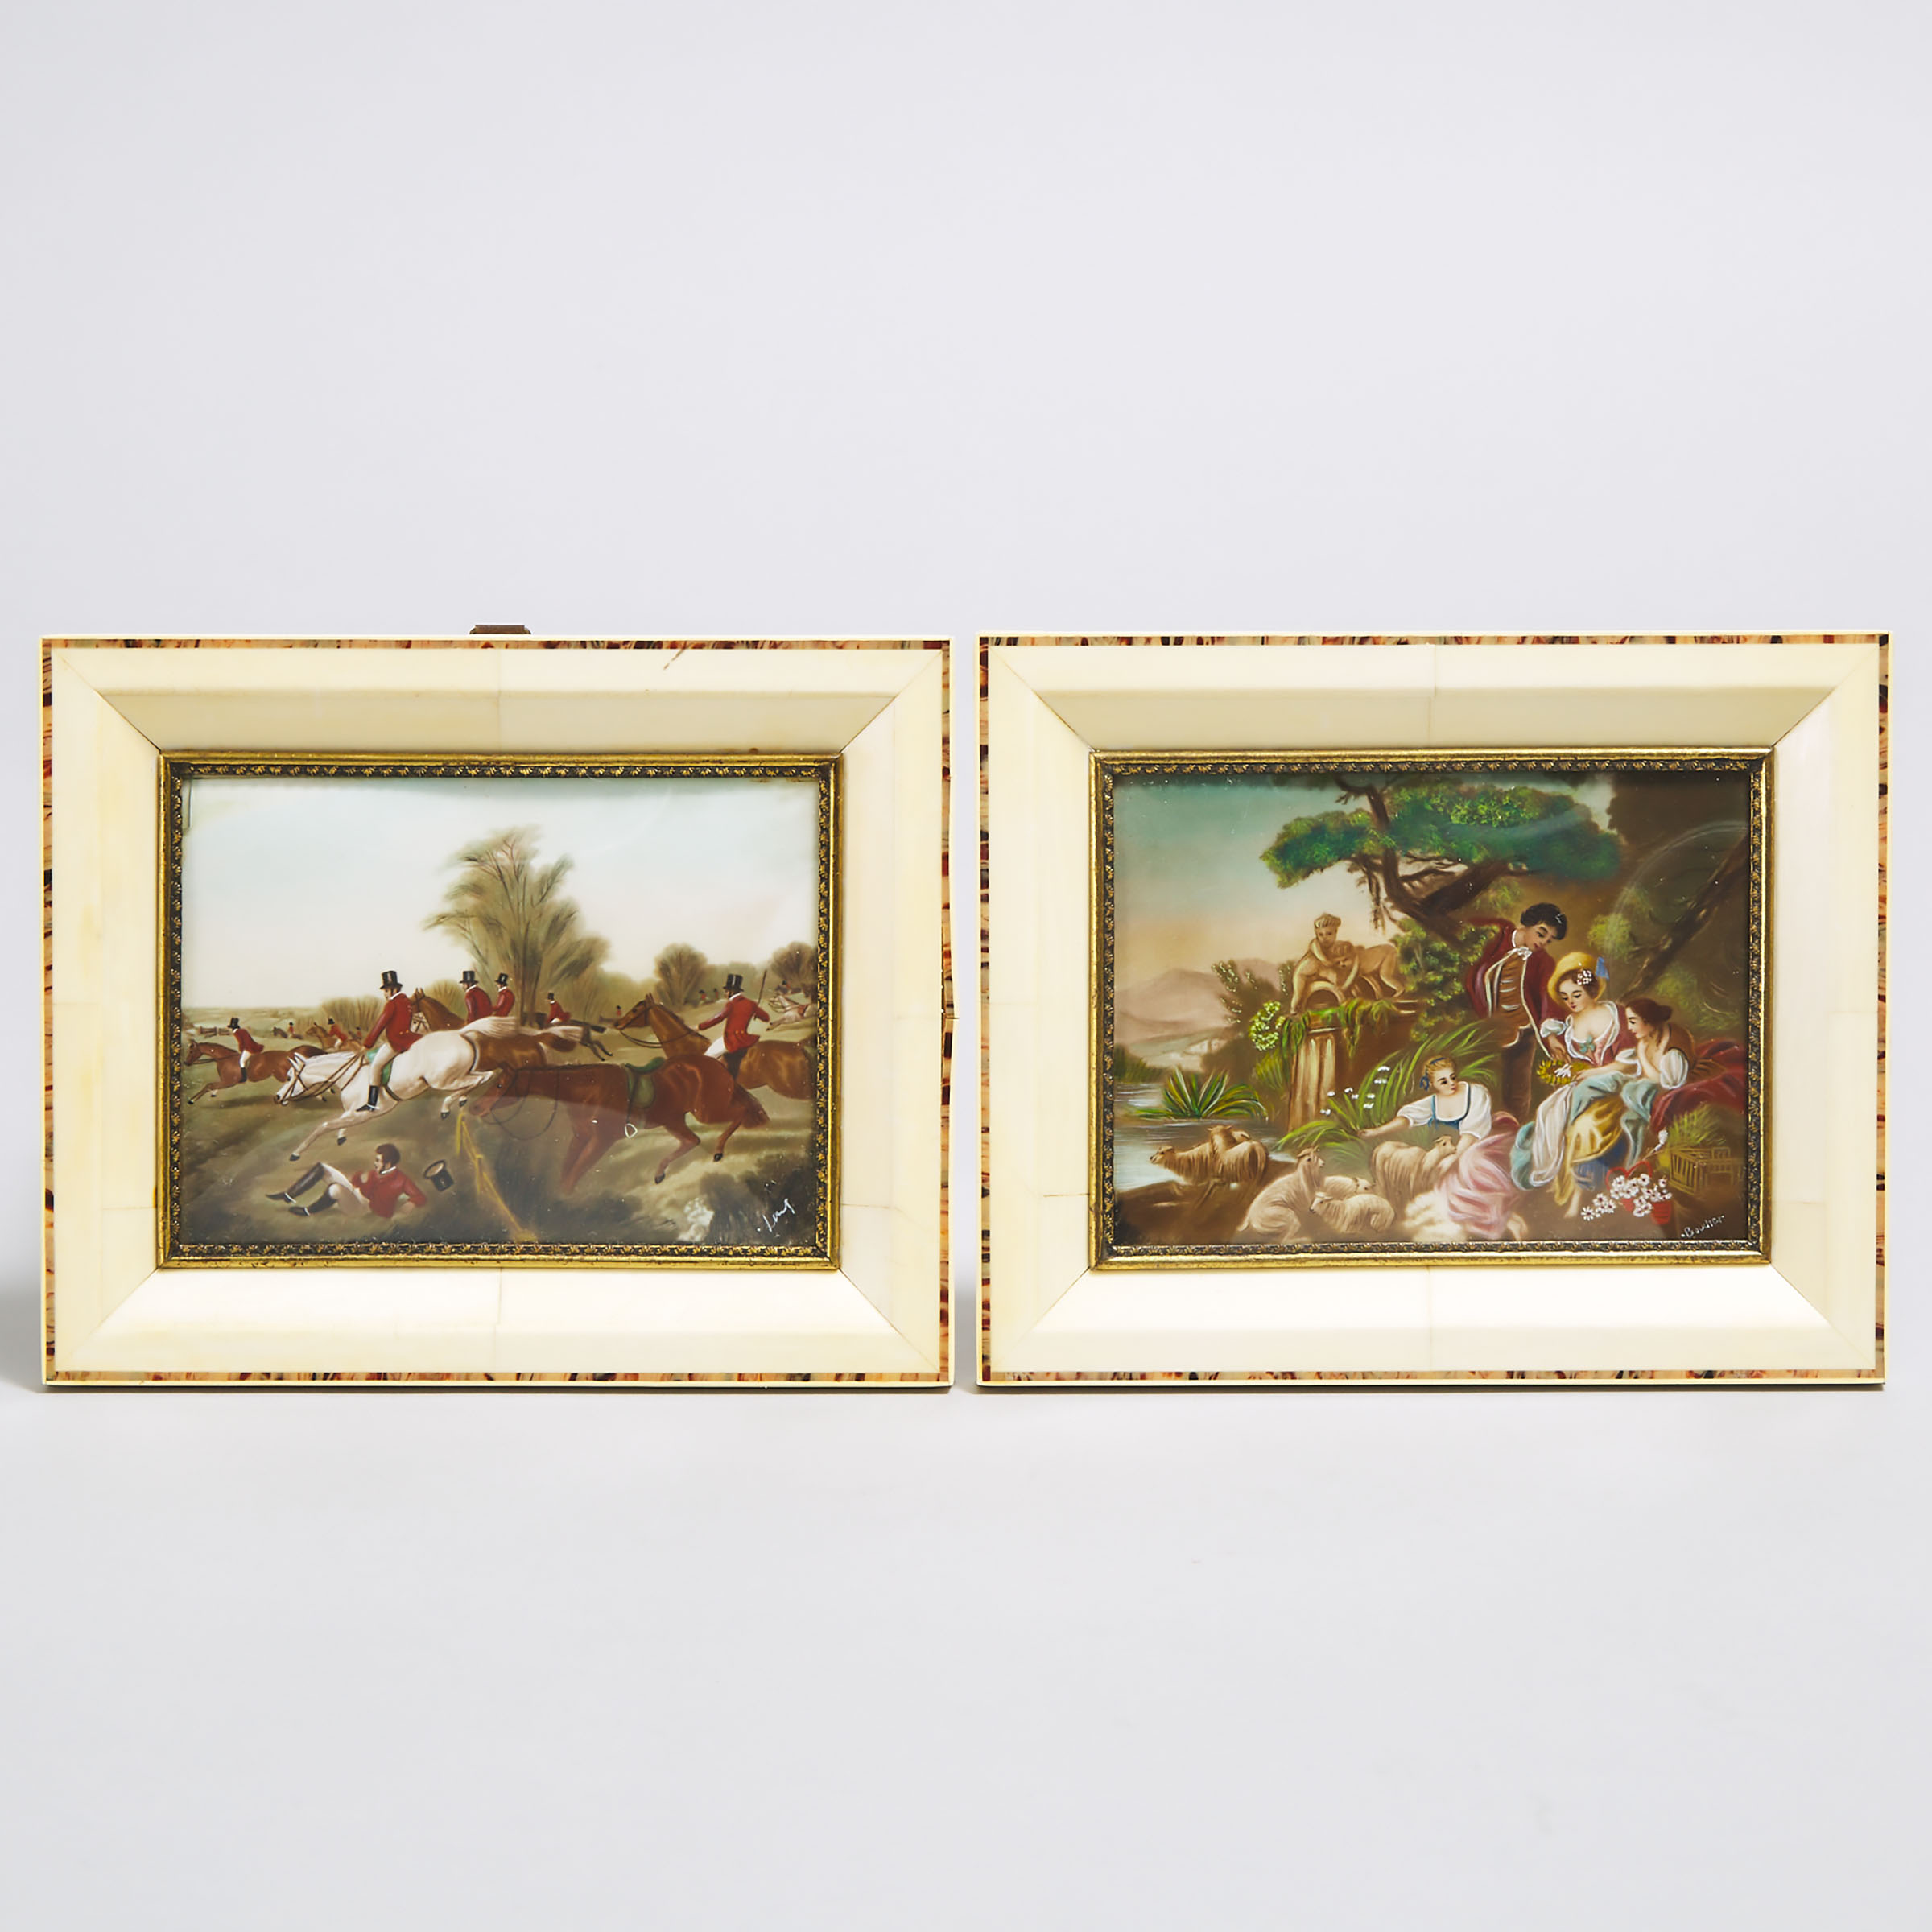 Pair of French Miniature Paintings, early 20th century